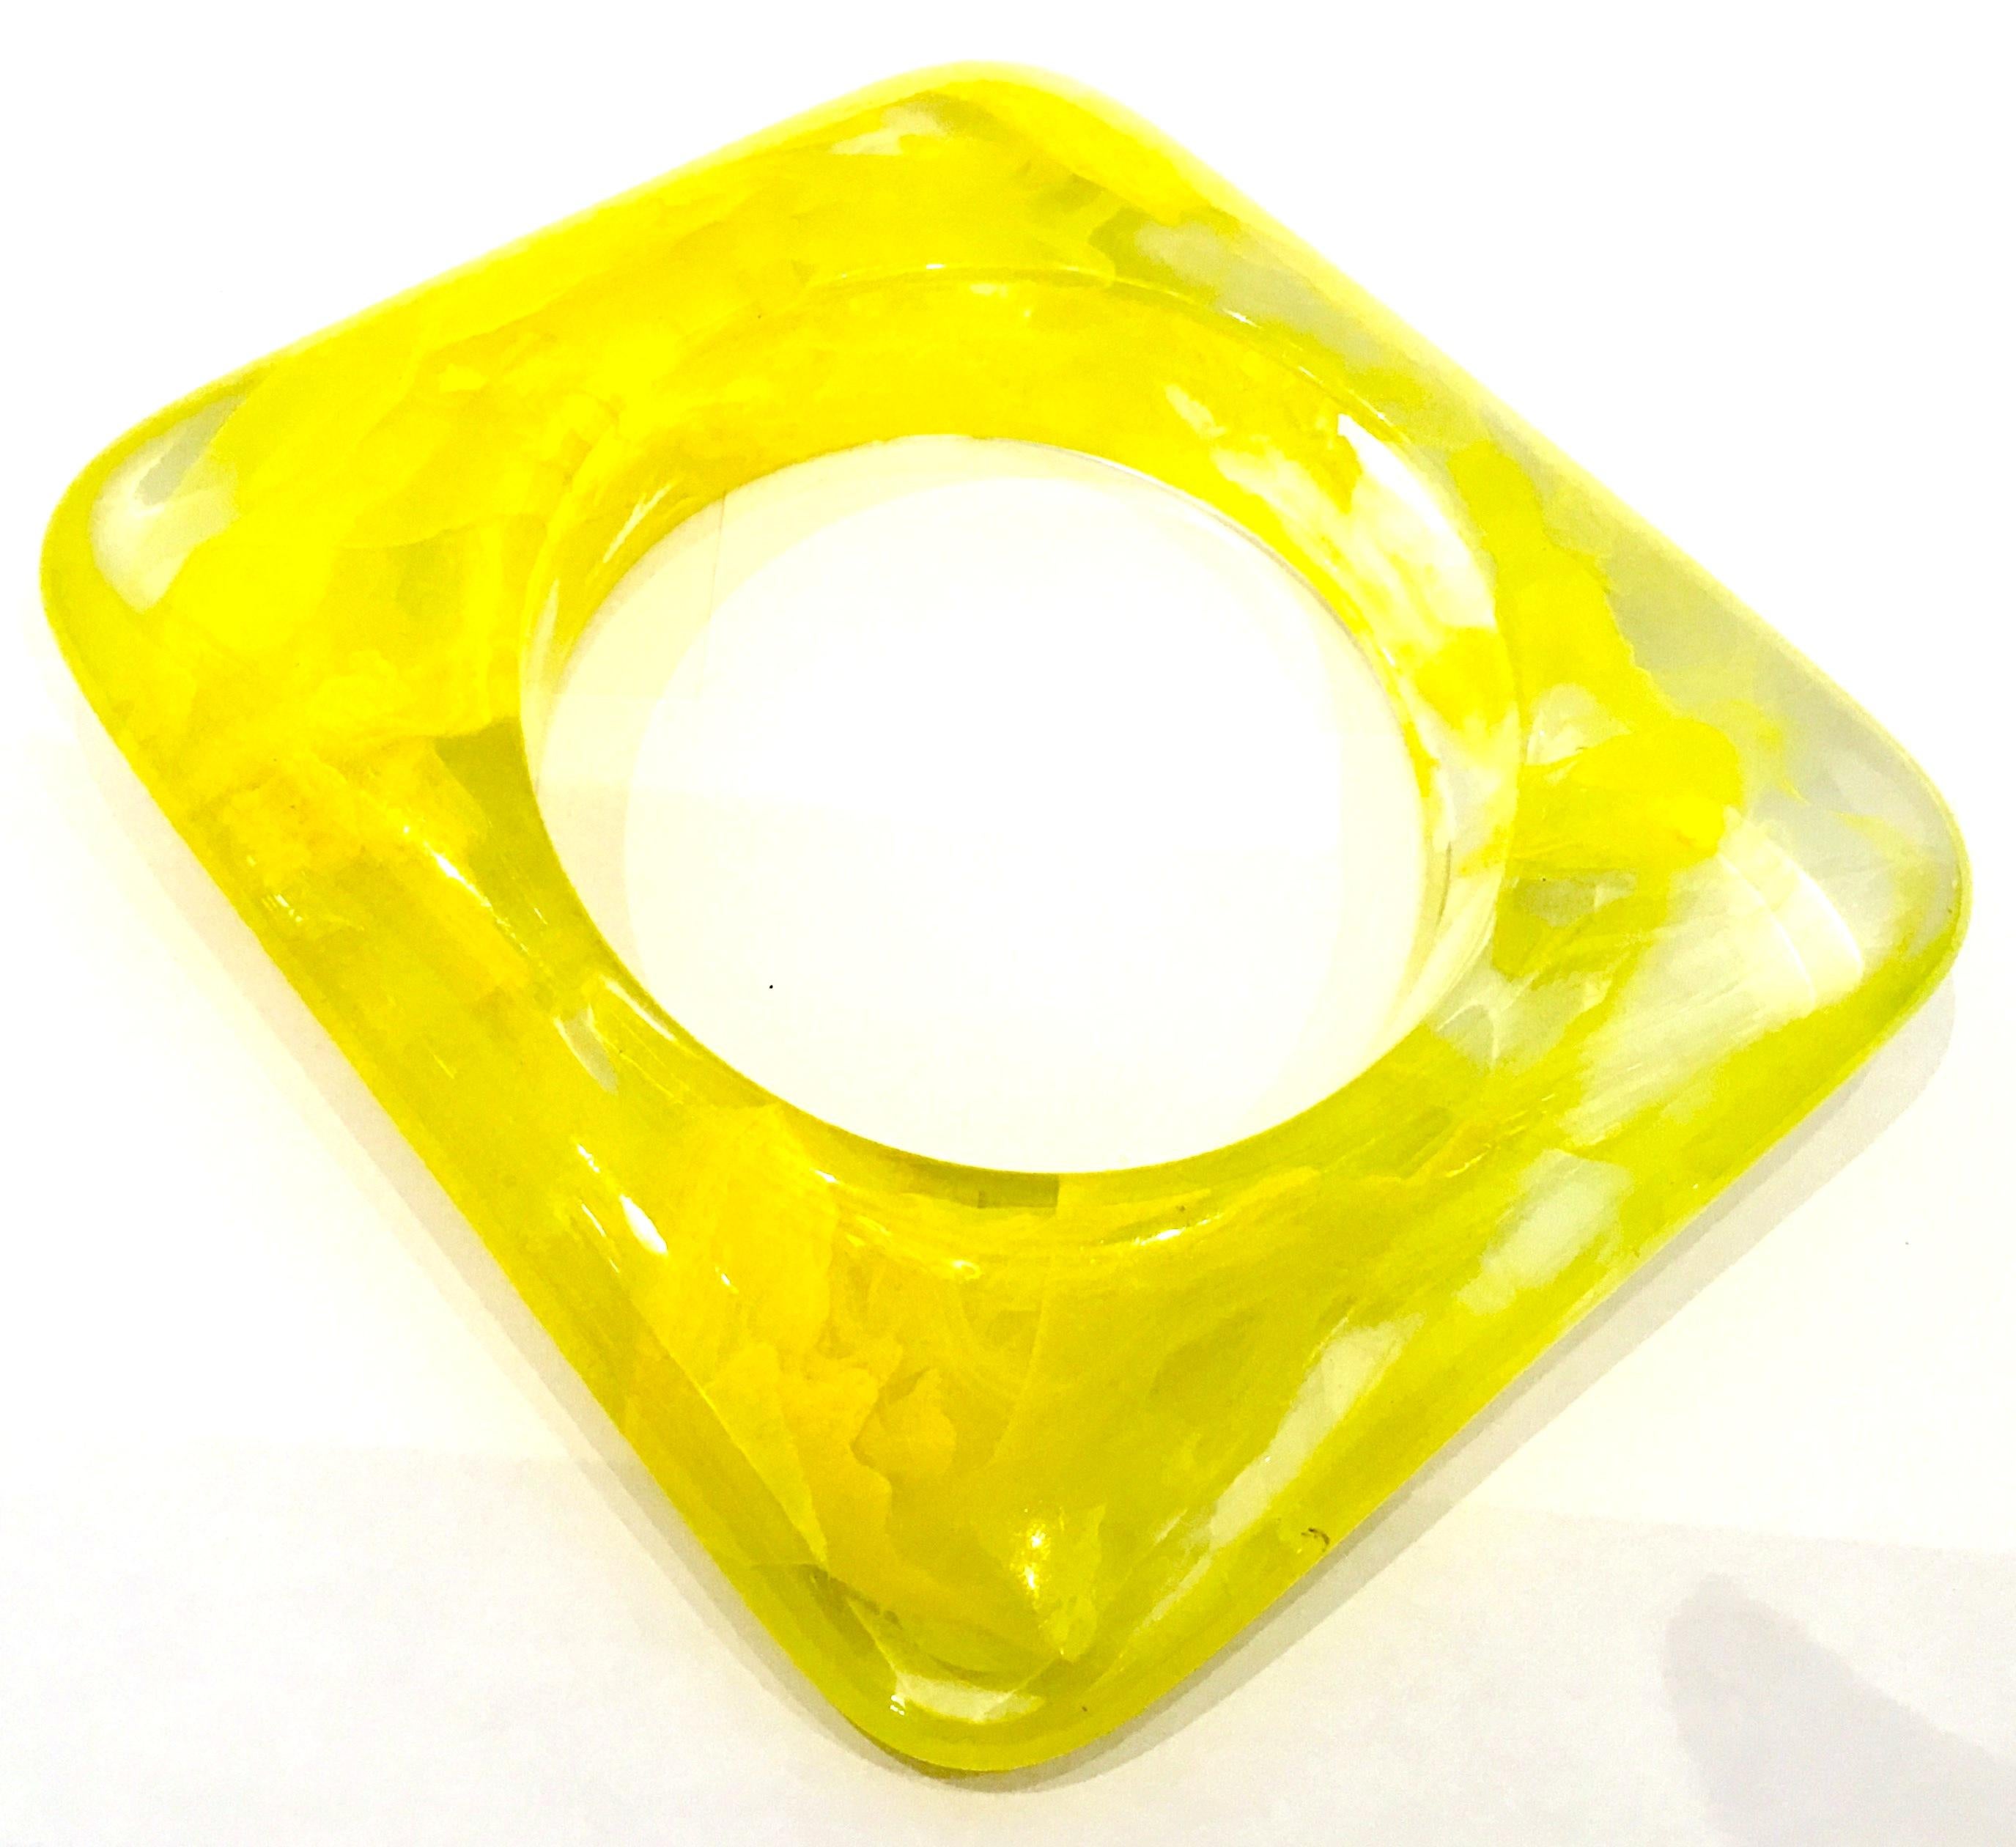 Lucite Organic Form Circle In A Square Bangle Bracelet For Sale 1